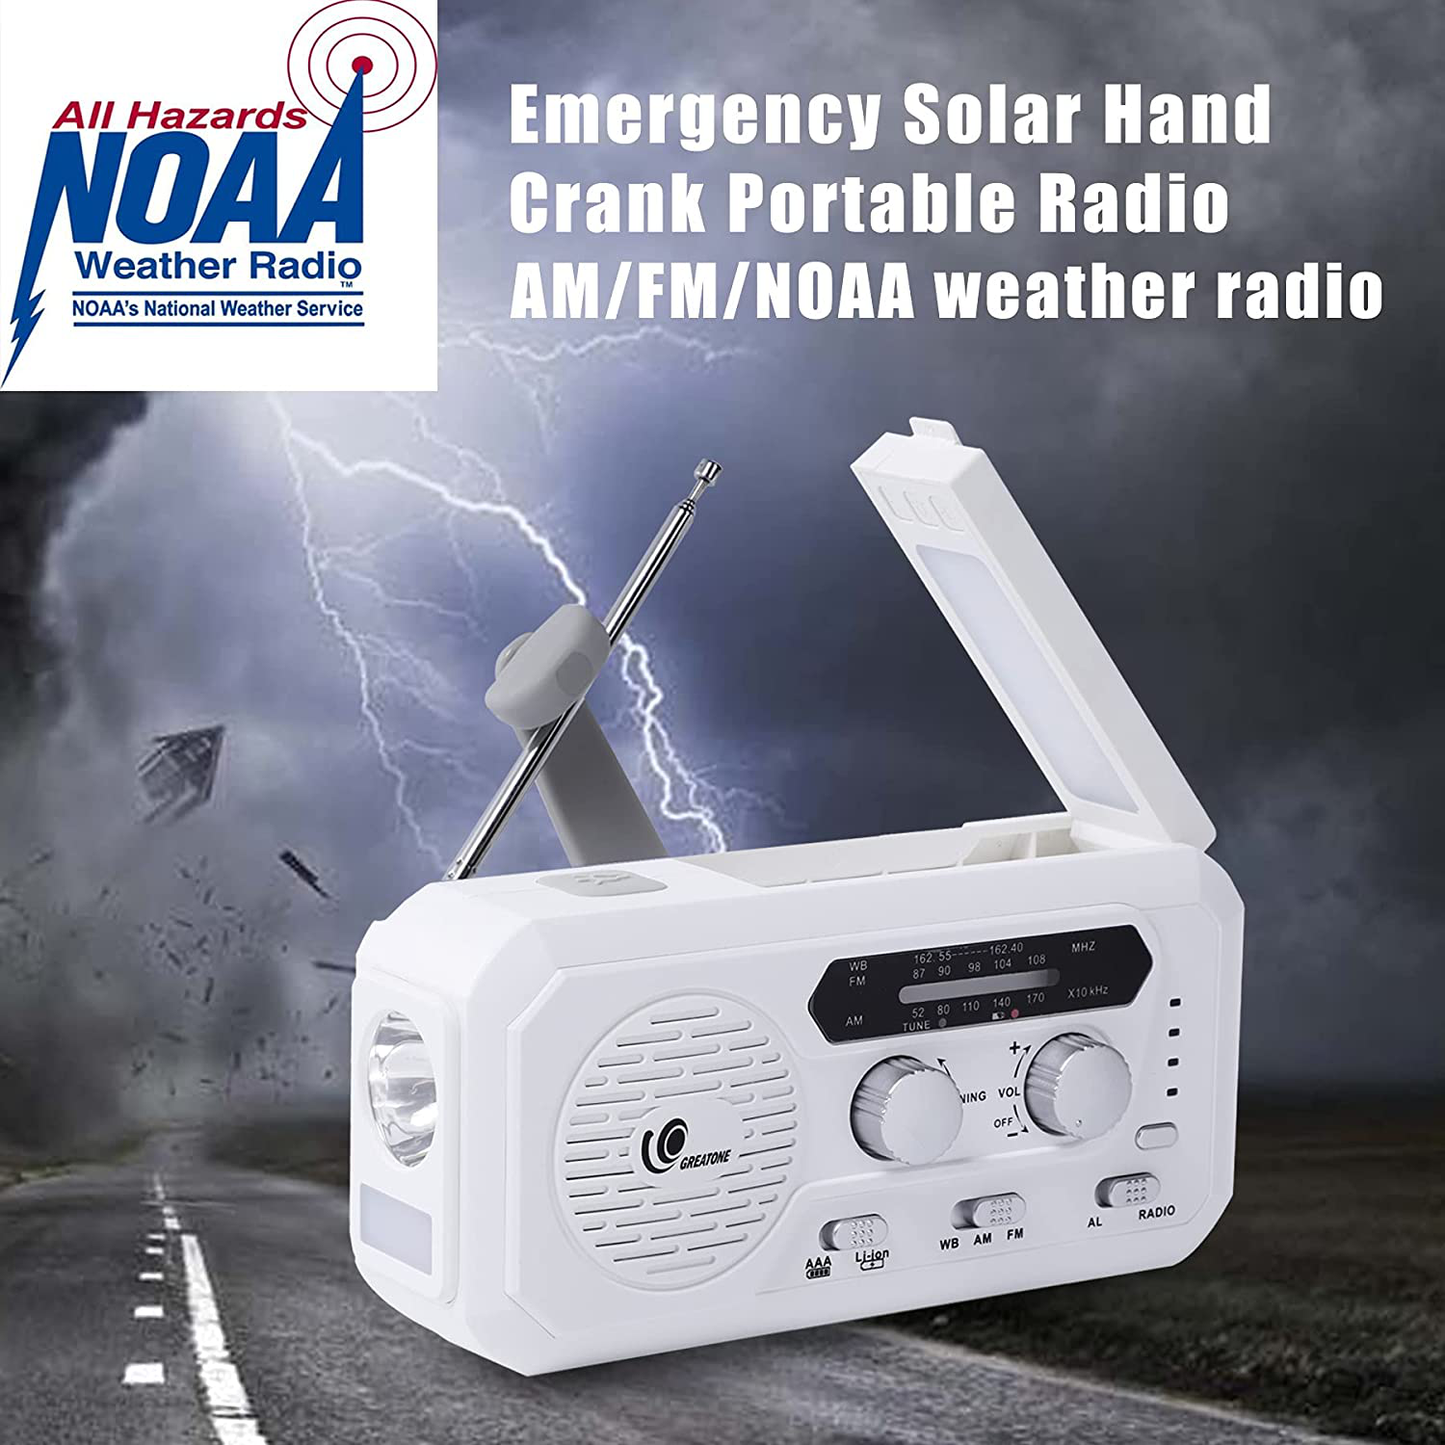 GREATONE Weather Radio Emergency Solar Crank Radio with Flashlight and Reading Lamp,AM/FM/NOAA Protable Weather Radio for Home and Outdoor,5000mAh Power Bank SOS Alarm